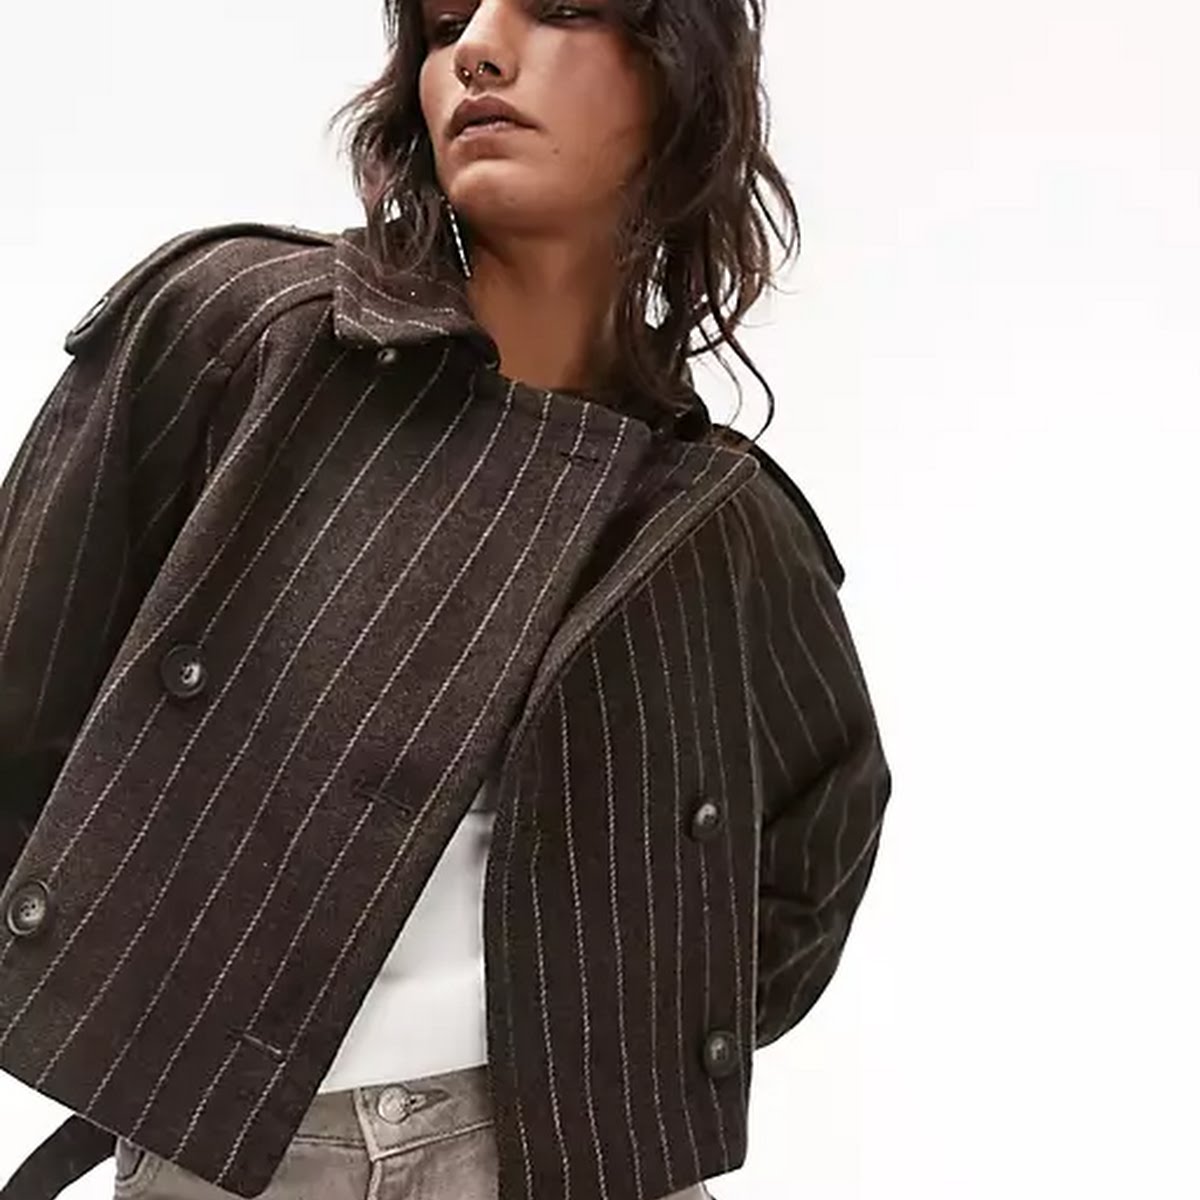 Topshop Cropped Pinstripe Trench, €44